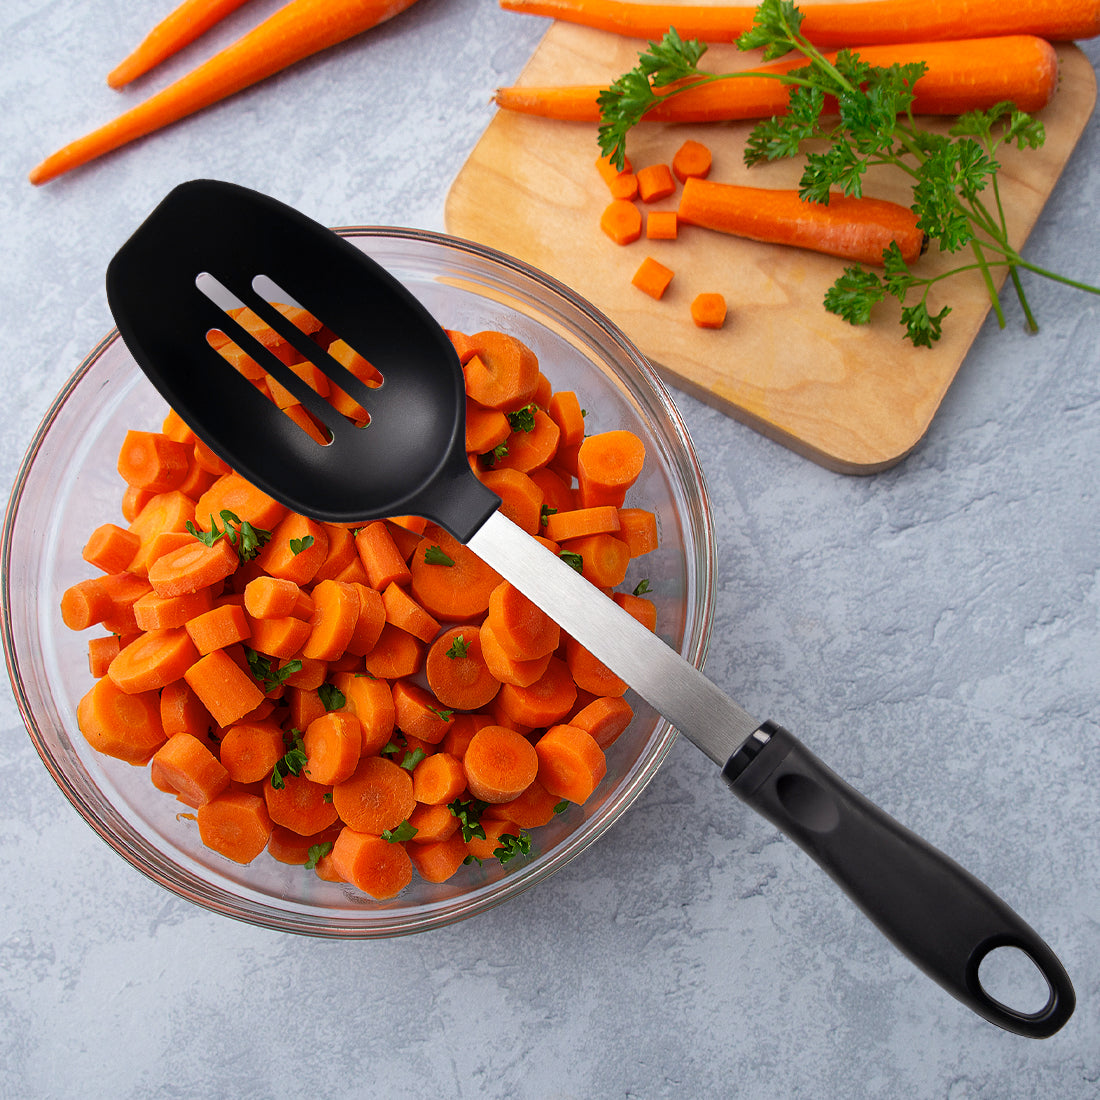 Chopped carrots with leafy greens, a cutting board and whole carrots with Rada's Basting Spoon.